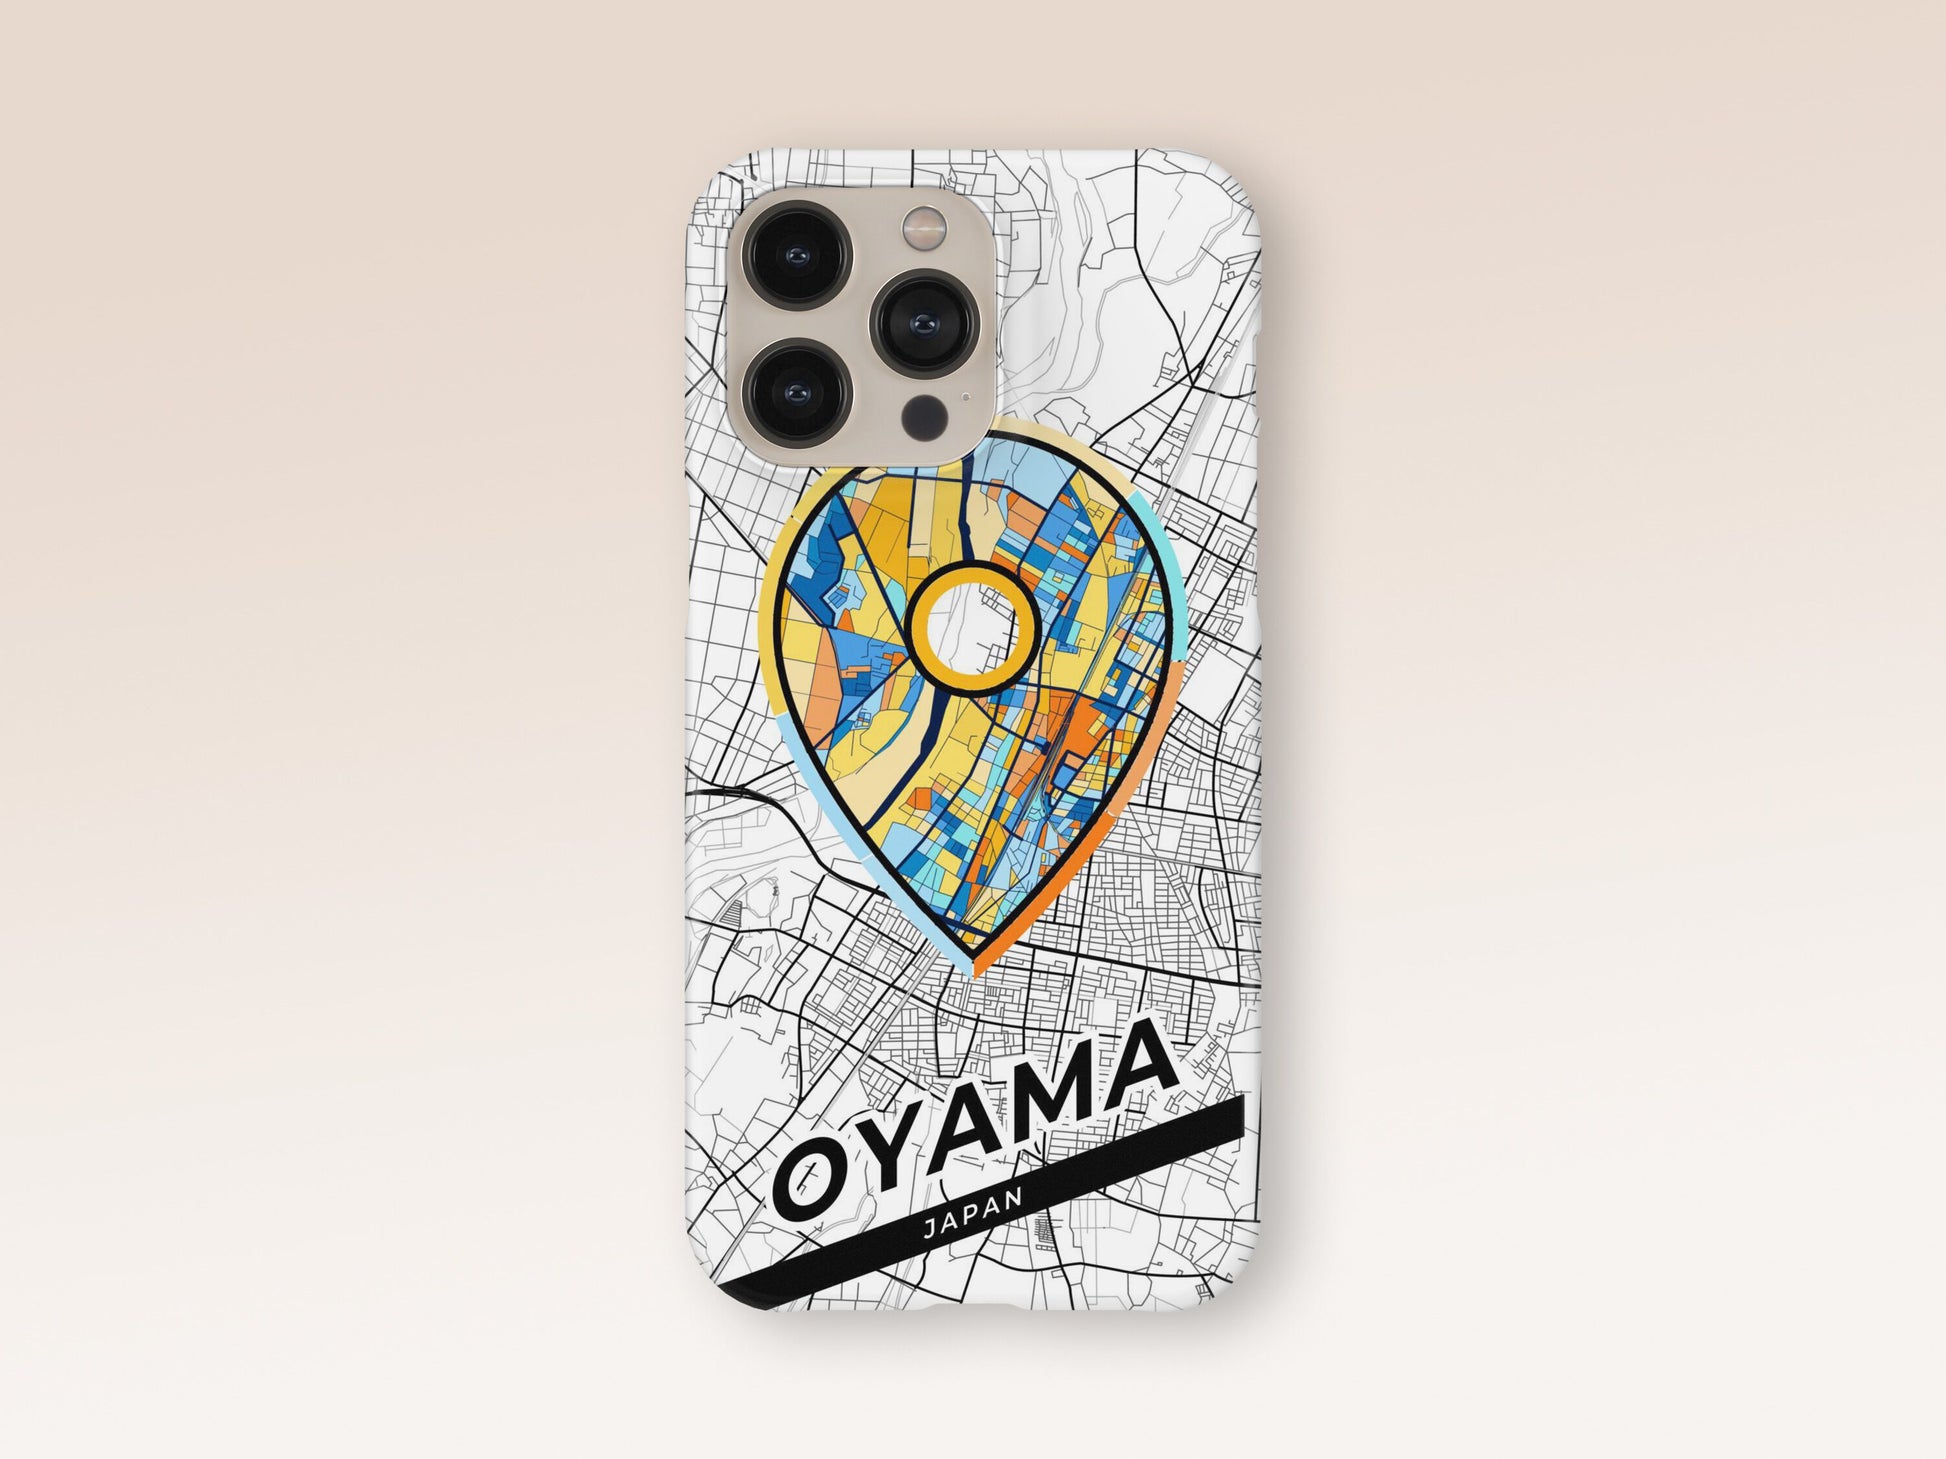 Oyama Japan slim phone case with colorful icon 1